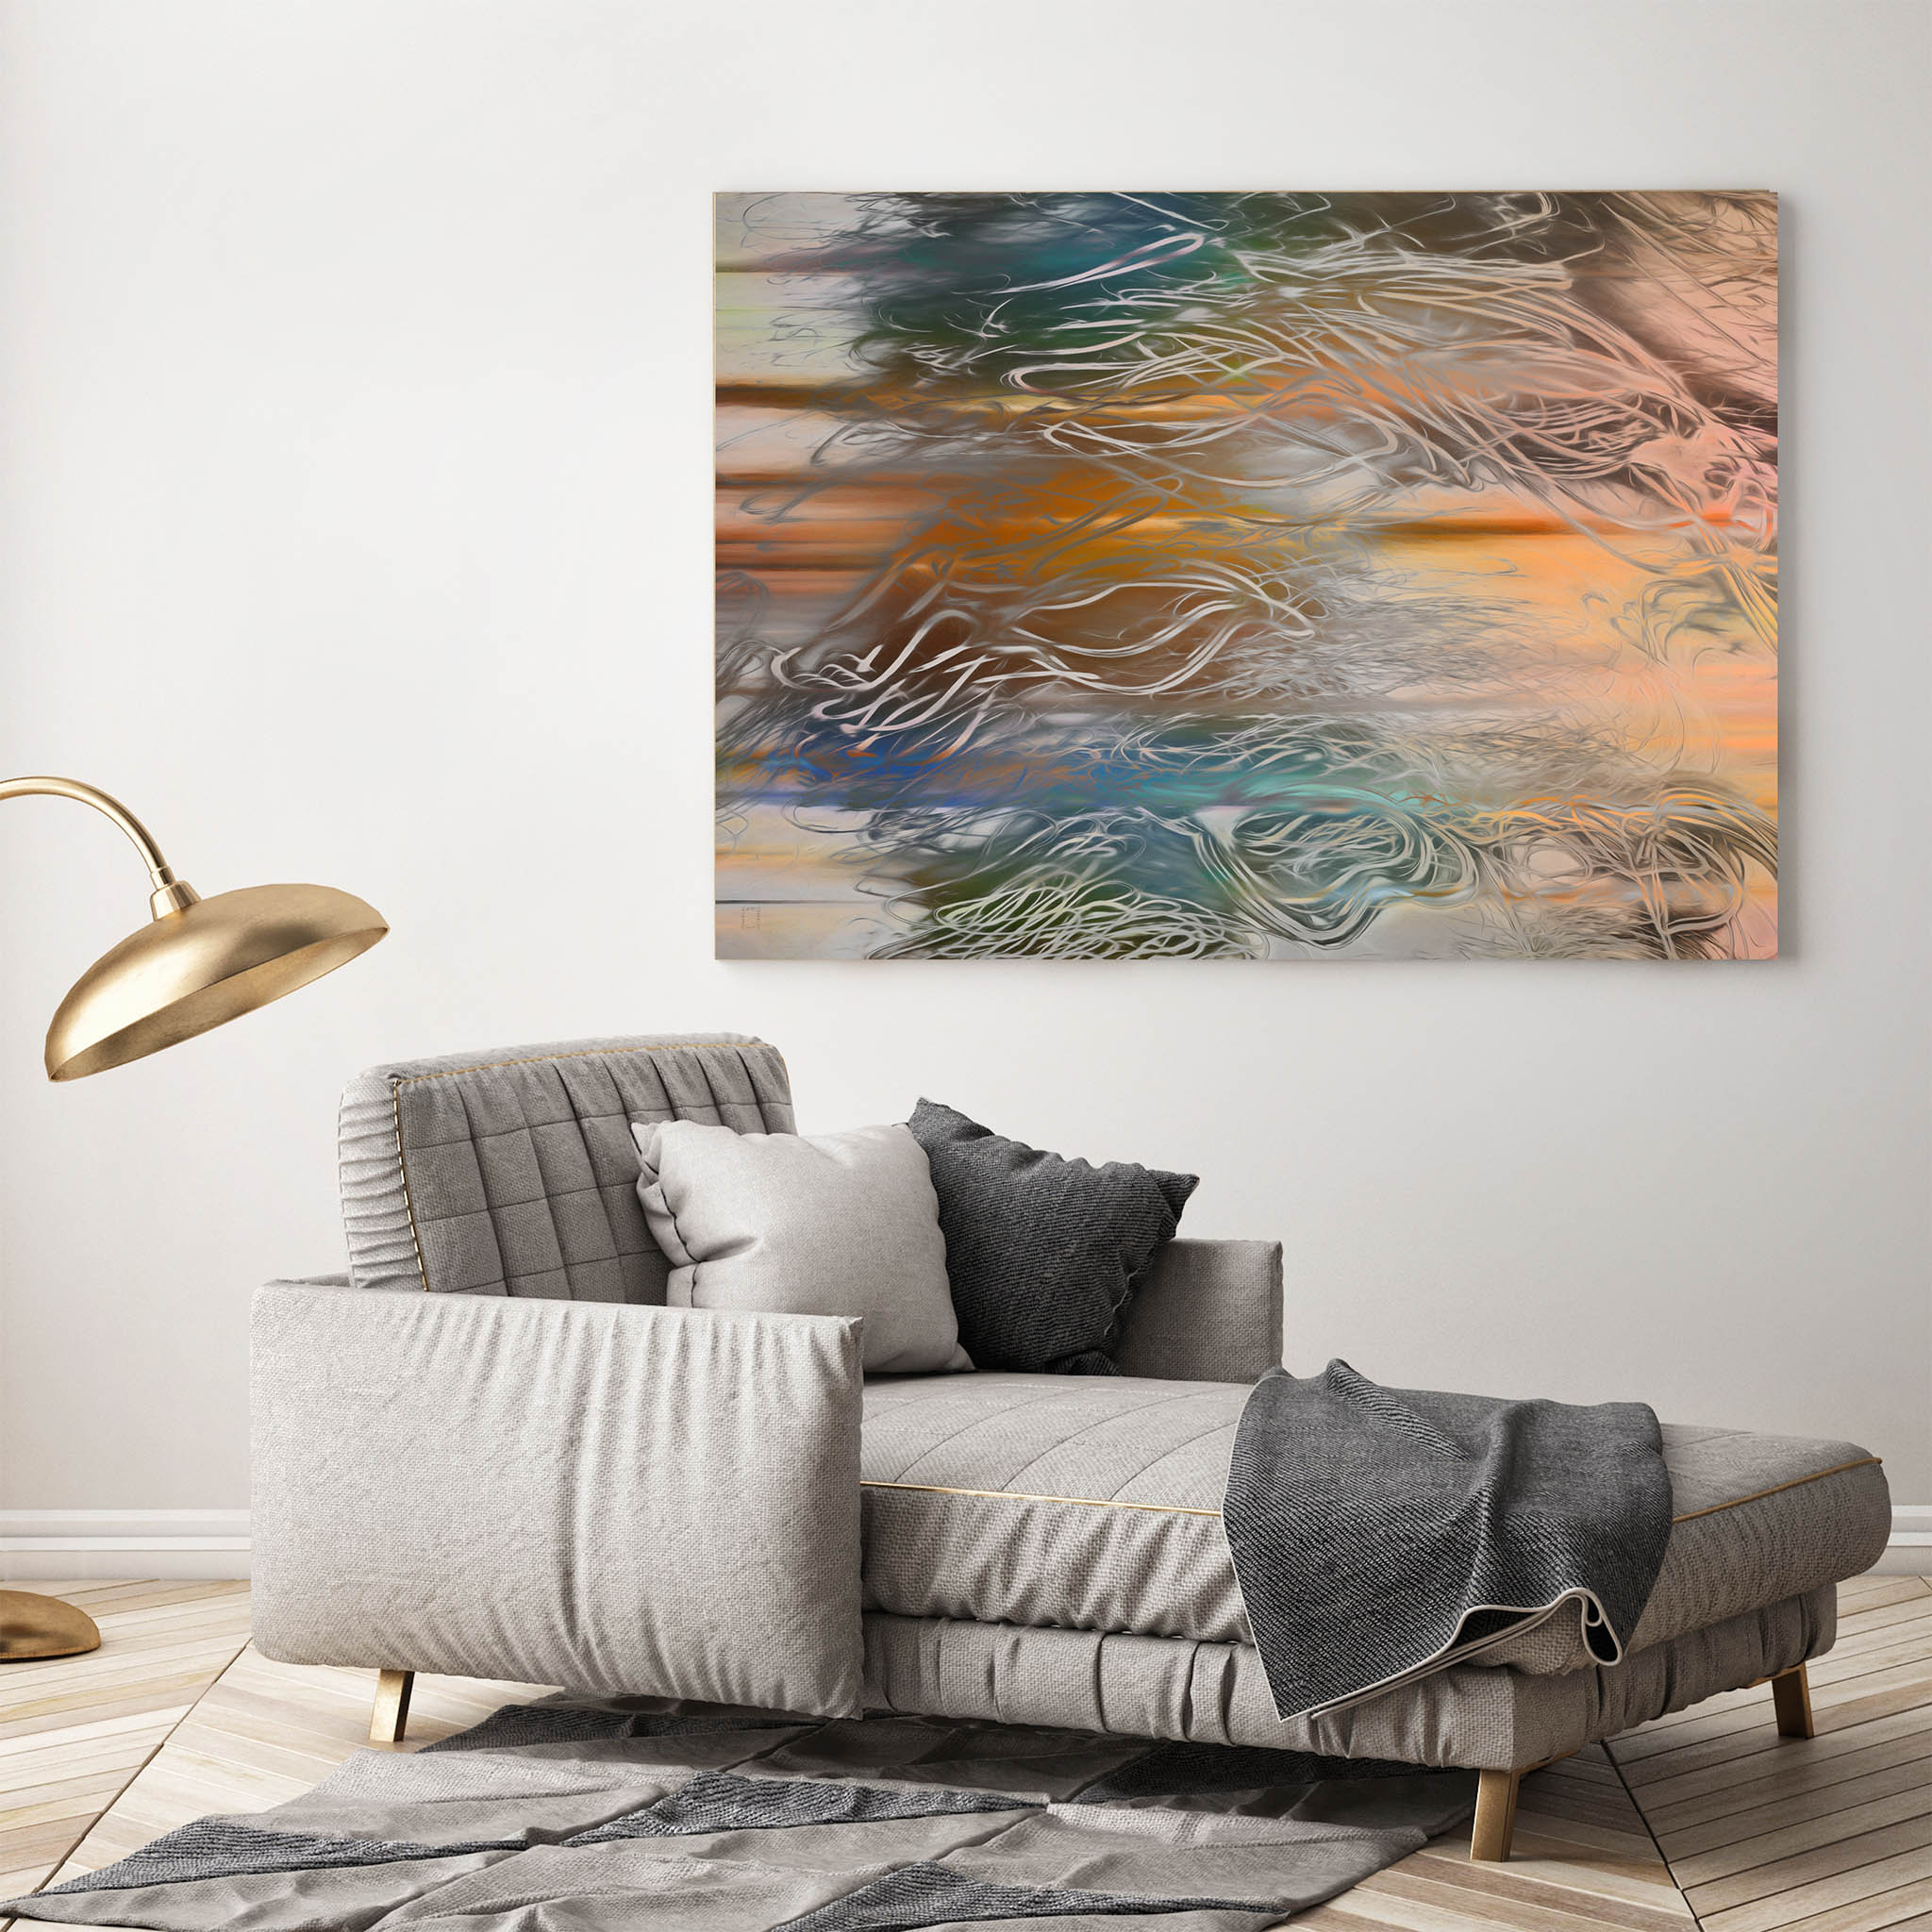 Colorful abstract picture in room.